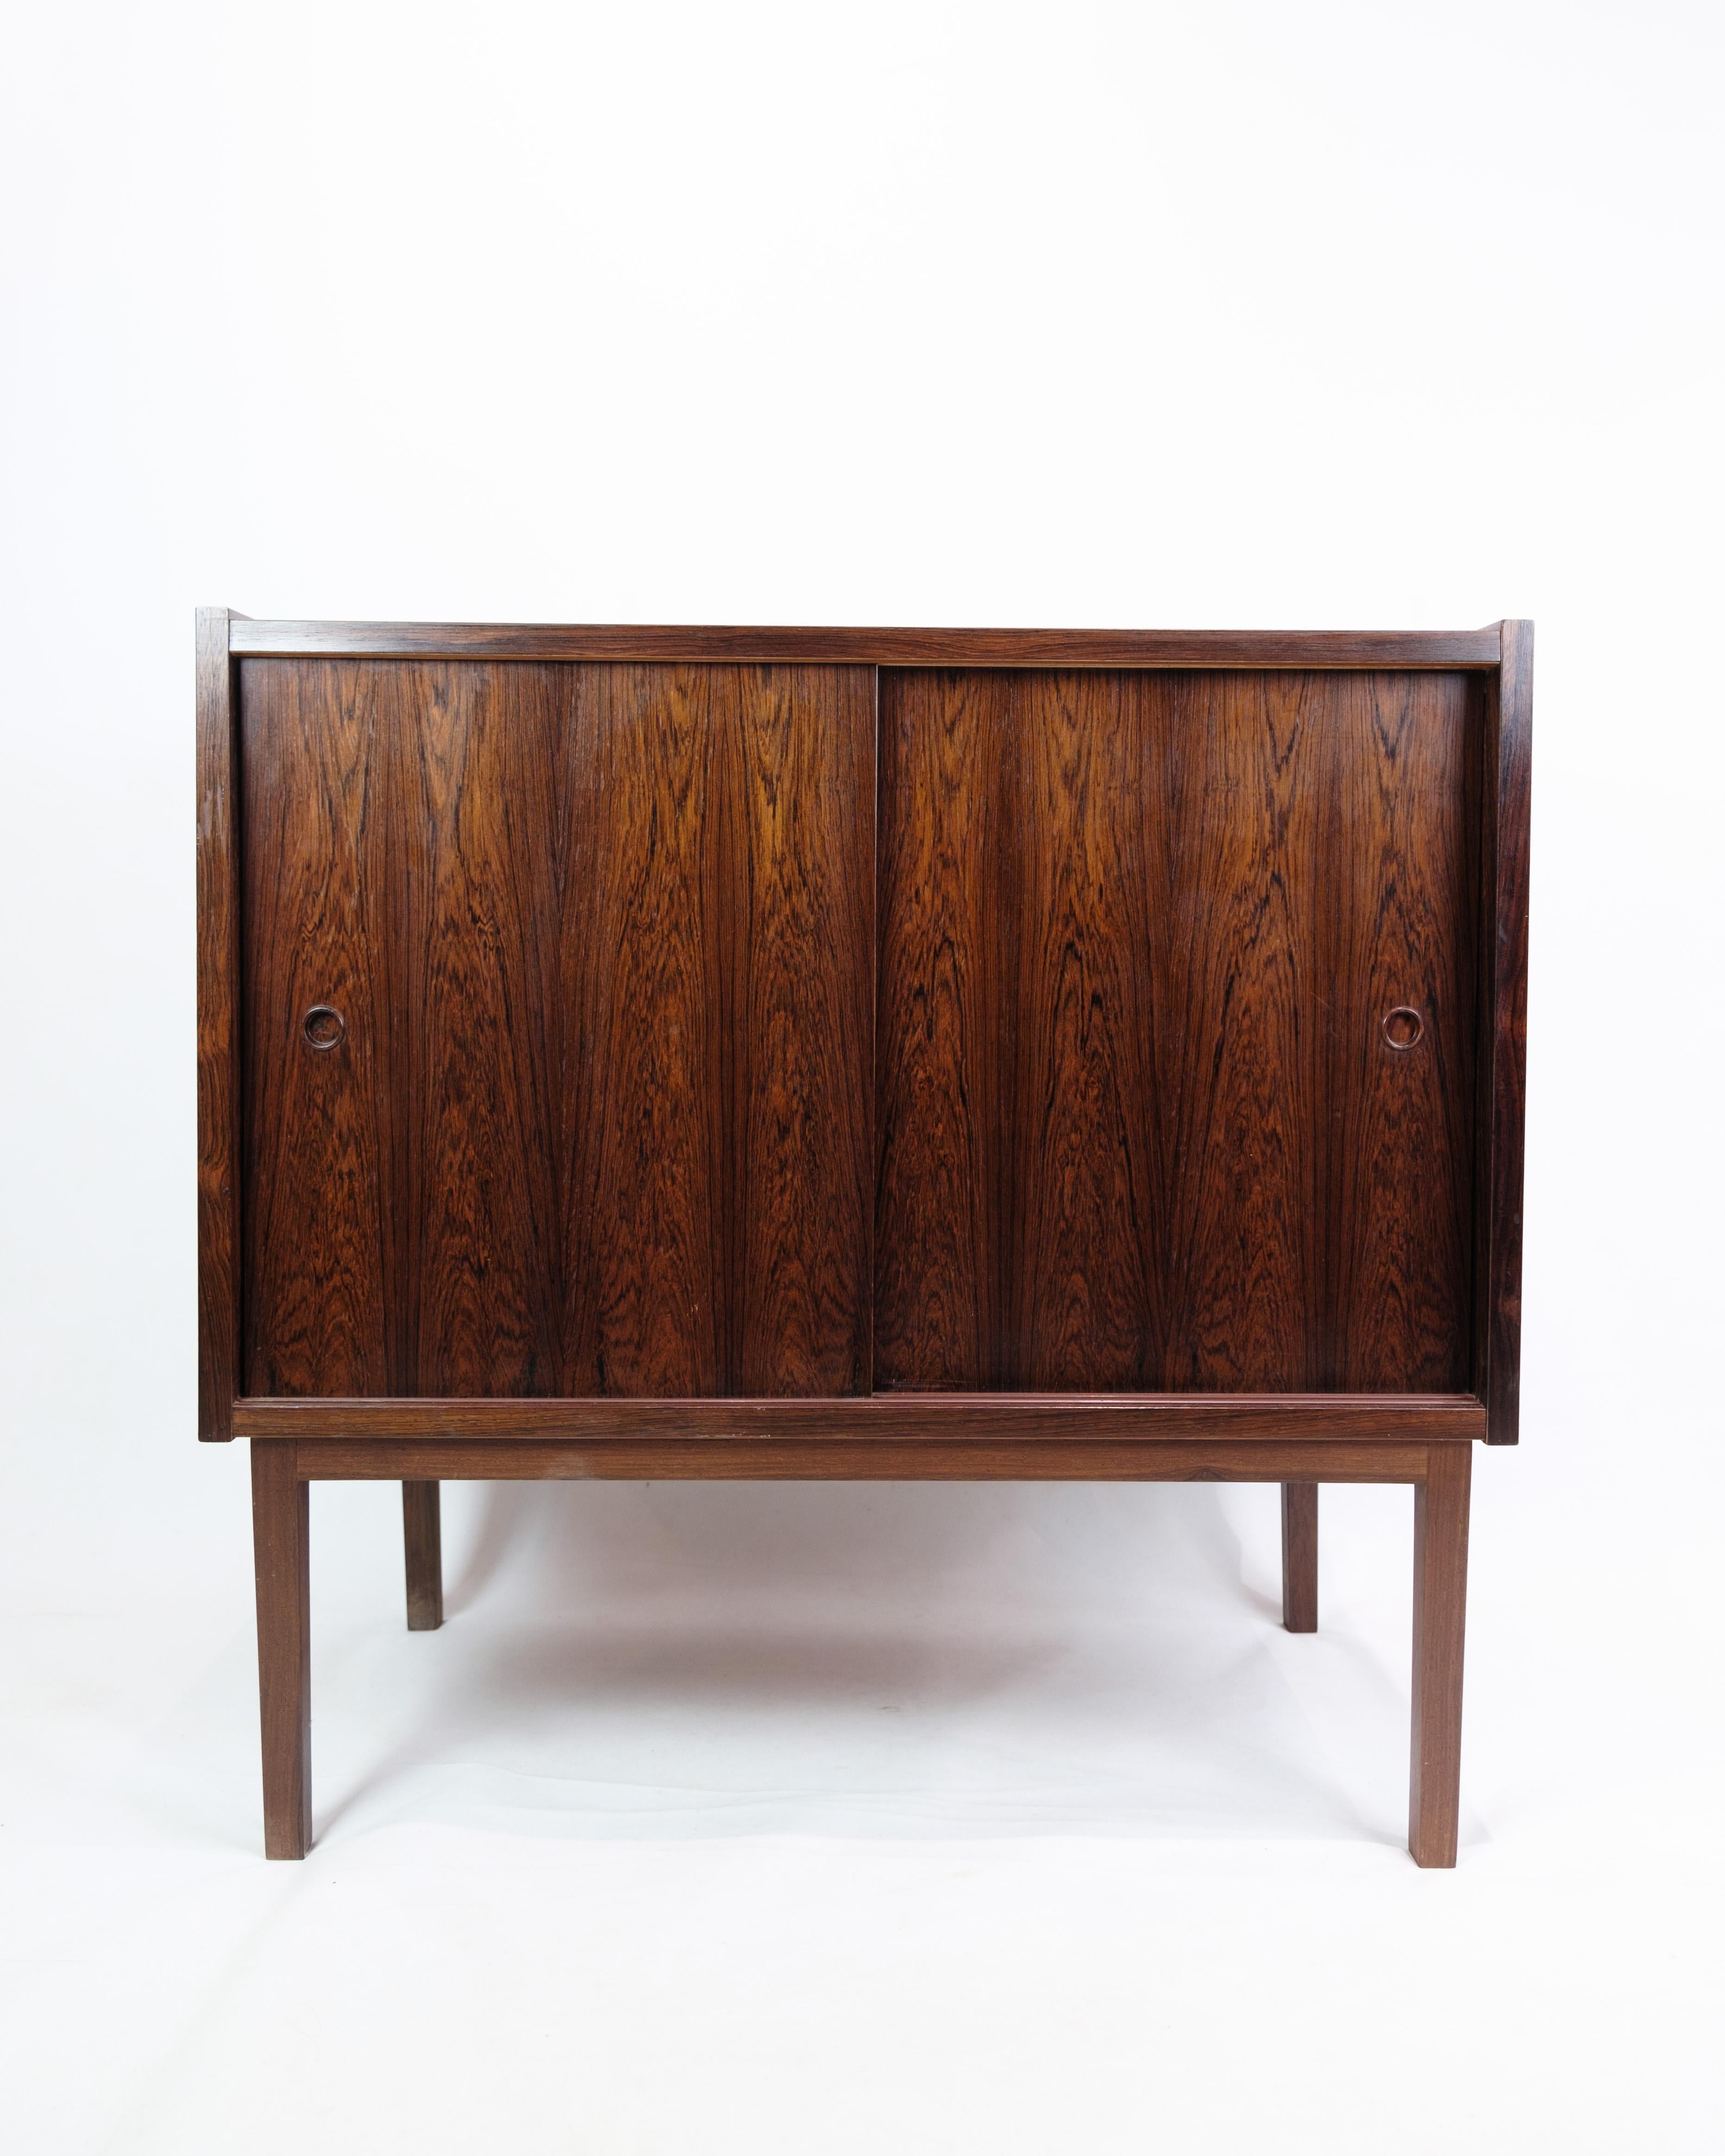 The small rosewood sideboard, of Danish design and from the 1960s, represents an era of stylish and functional furniture design. The rosewood, with its characteristic dark color and beautiful veins, gives the sideboard a unique and luxurious